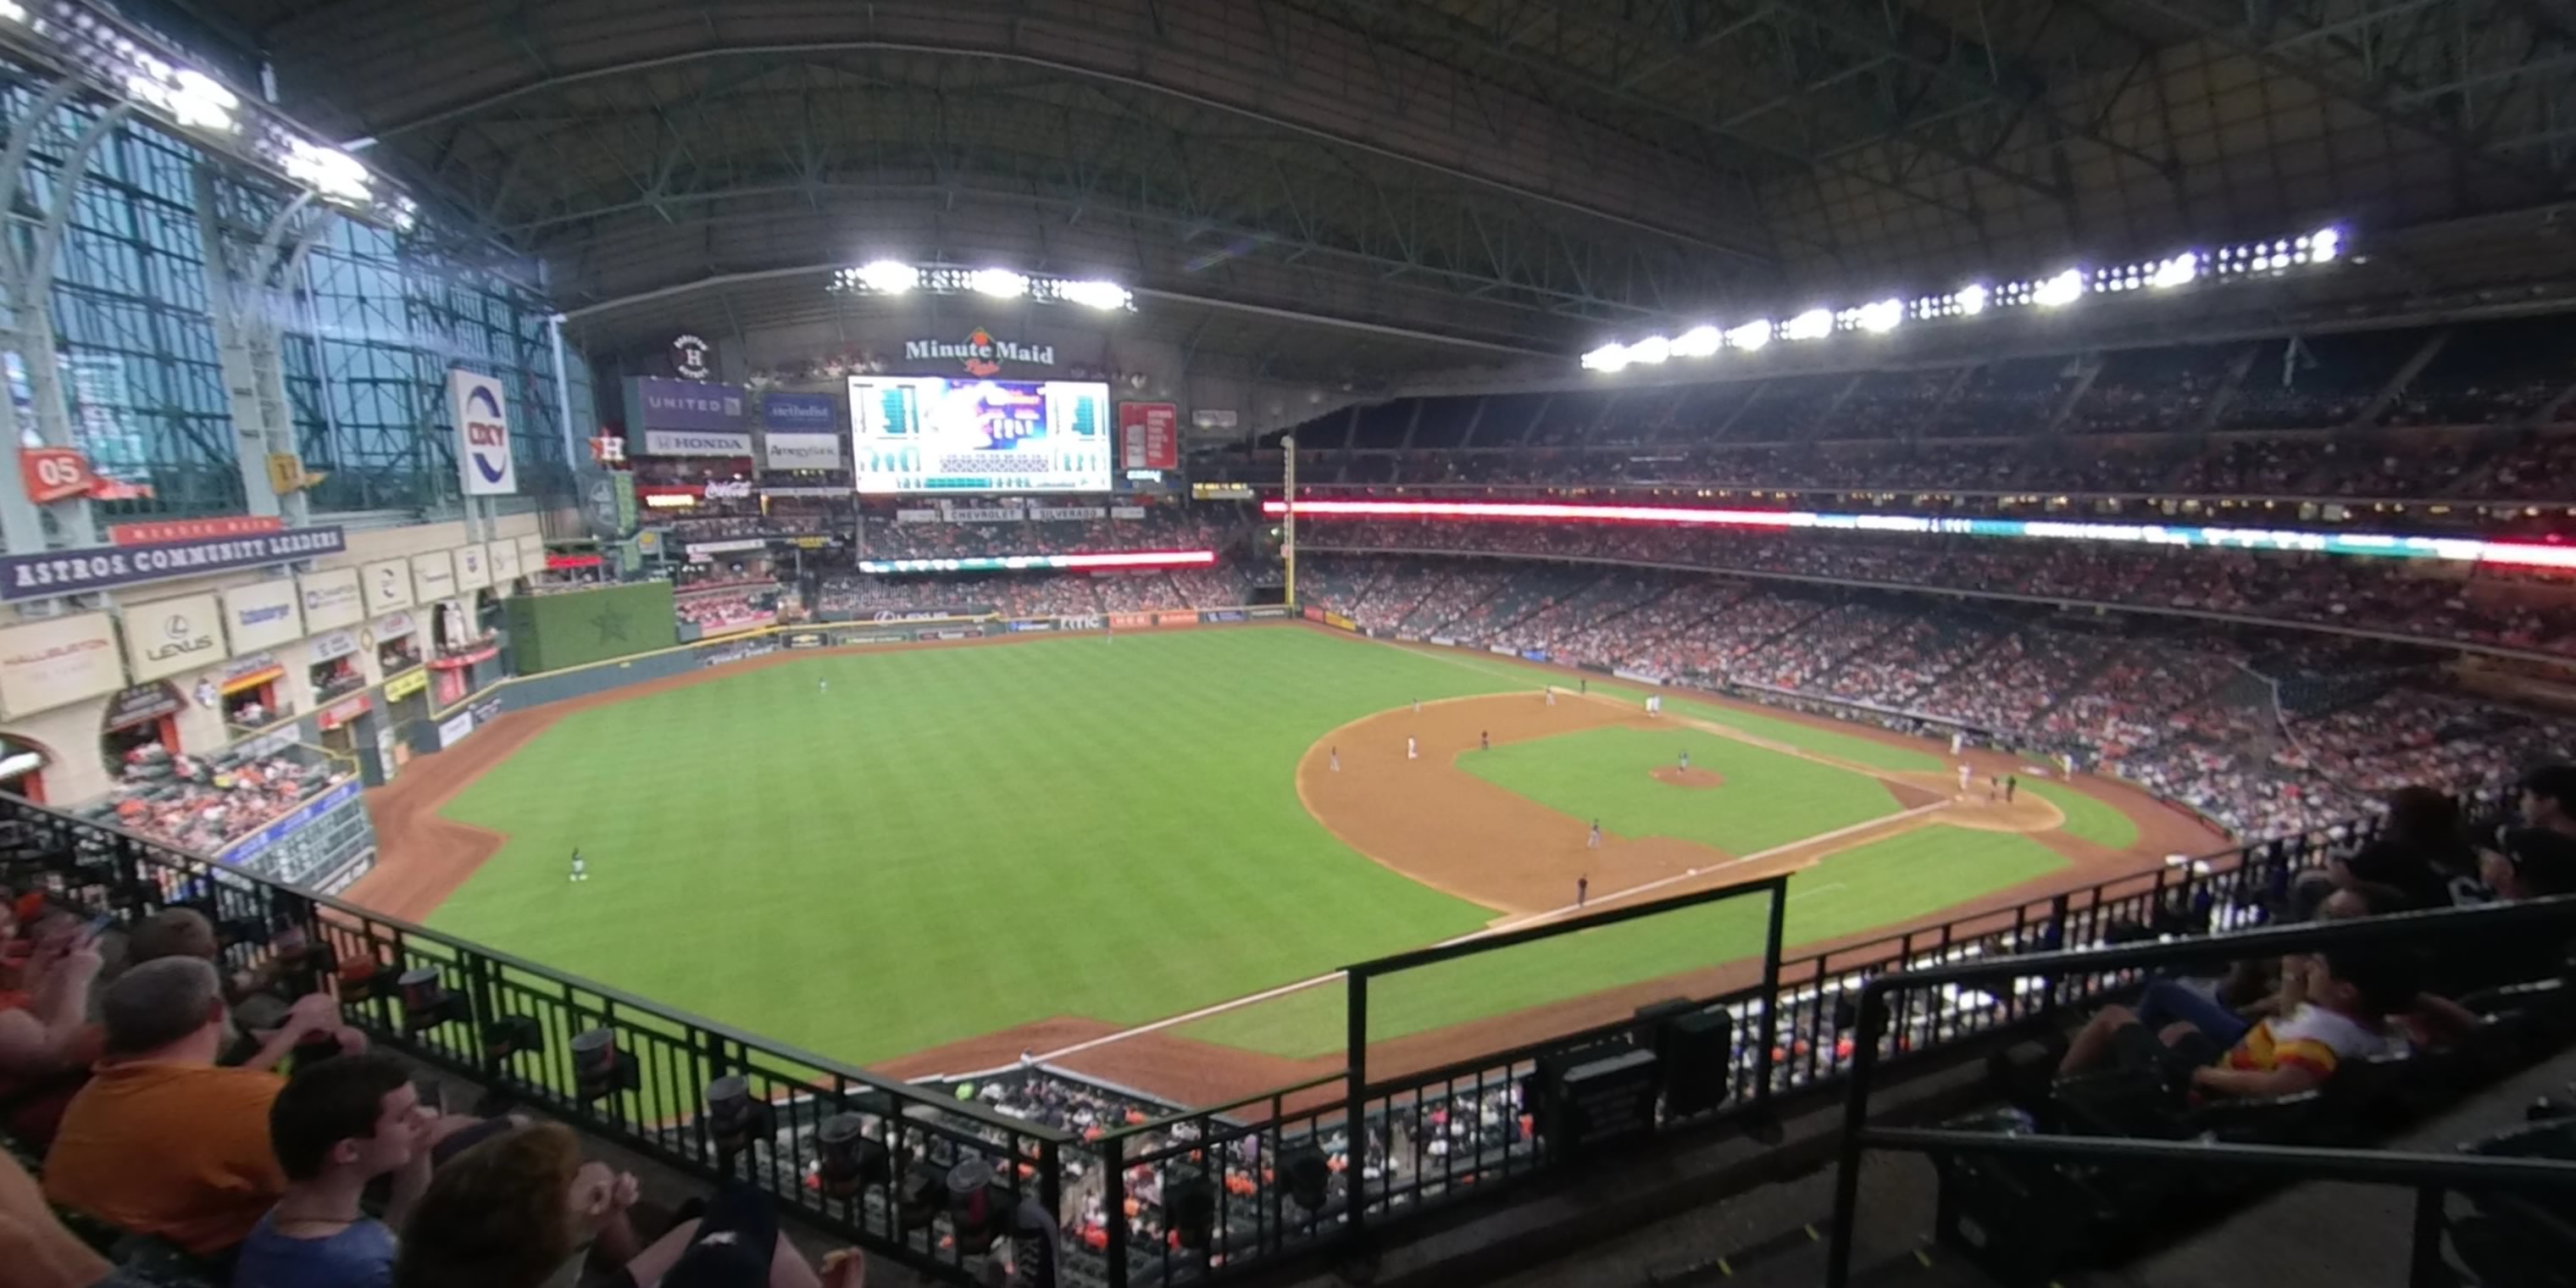 section 307 panoramic seat view  for baseball - minute maid park